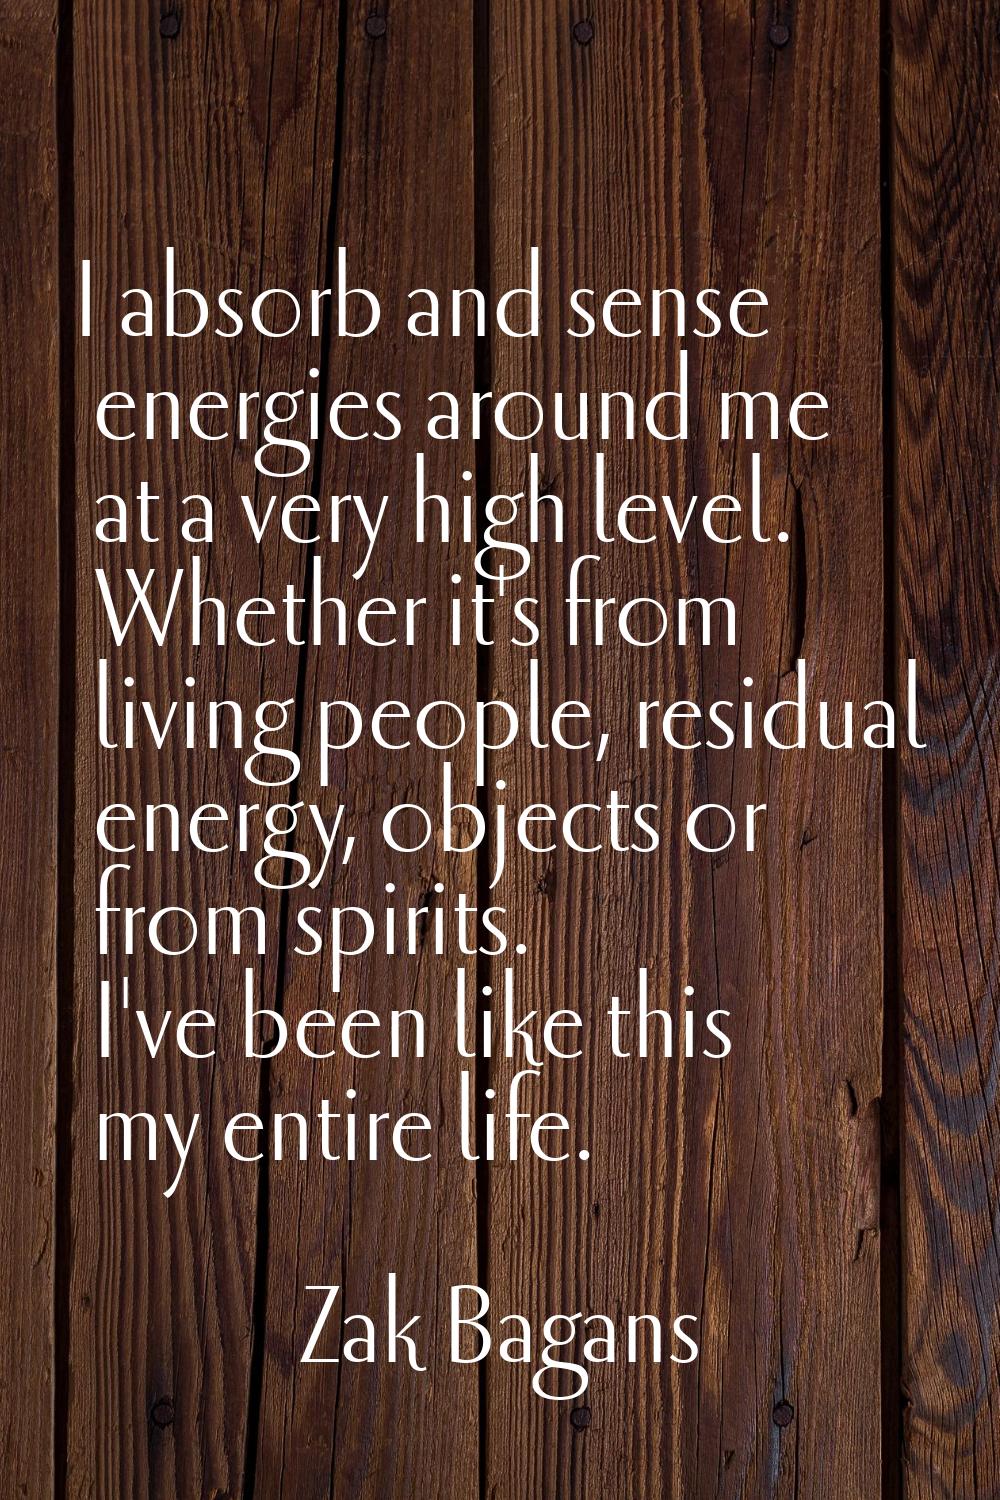 I absorb and sense energies around me at a very high level. Whether it's from living people, residu